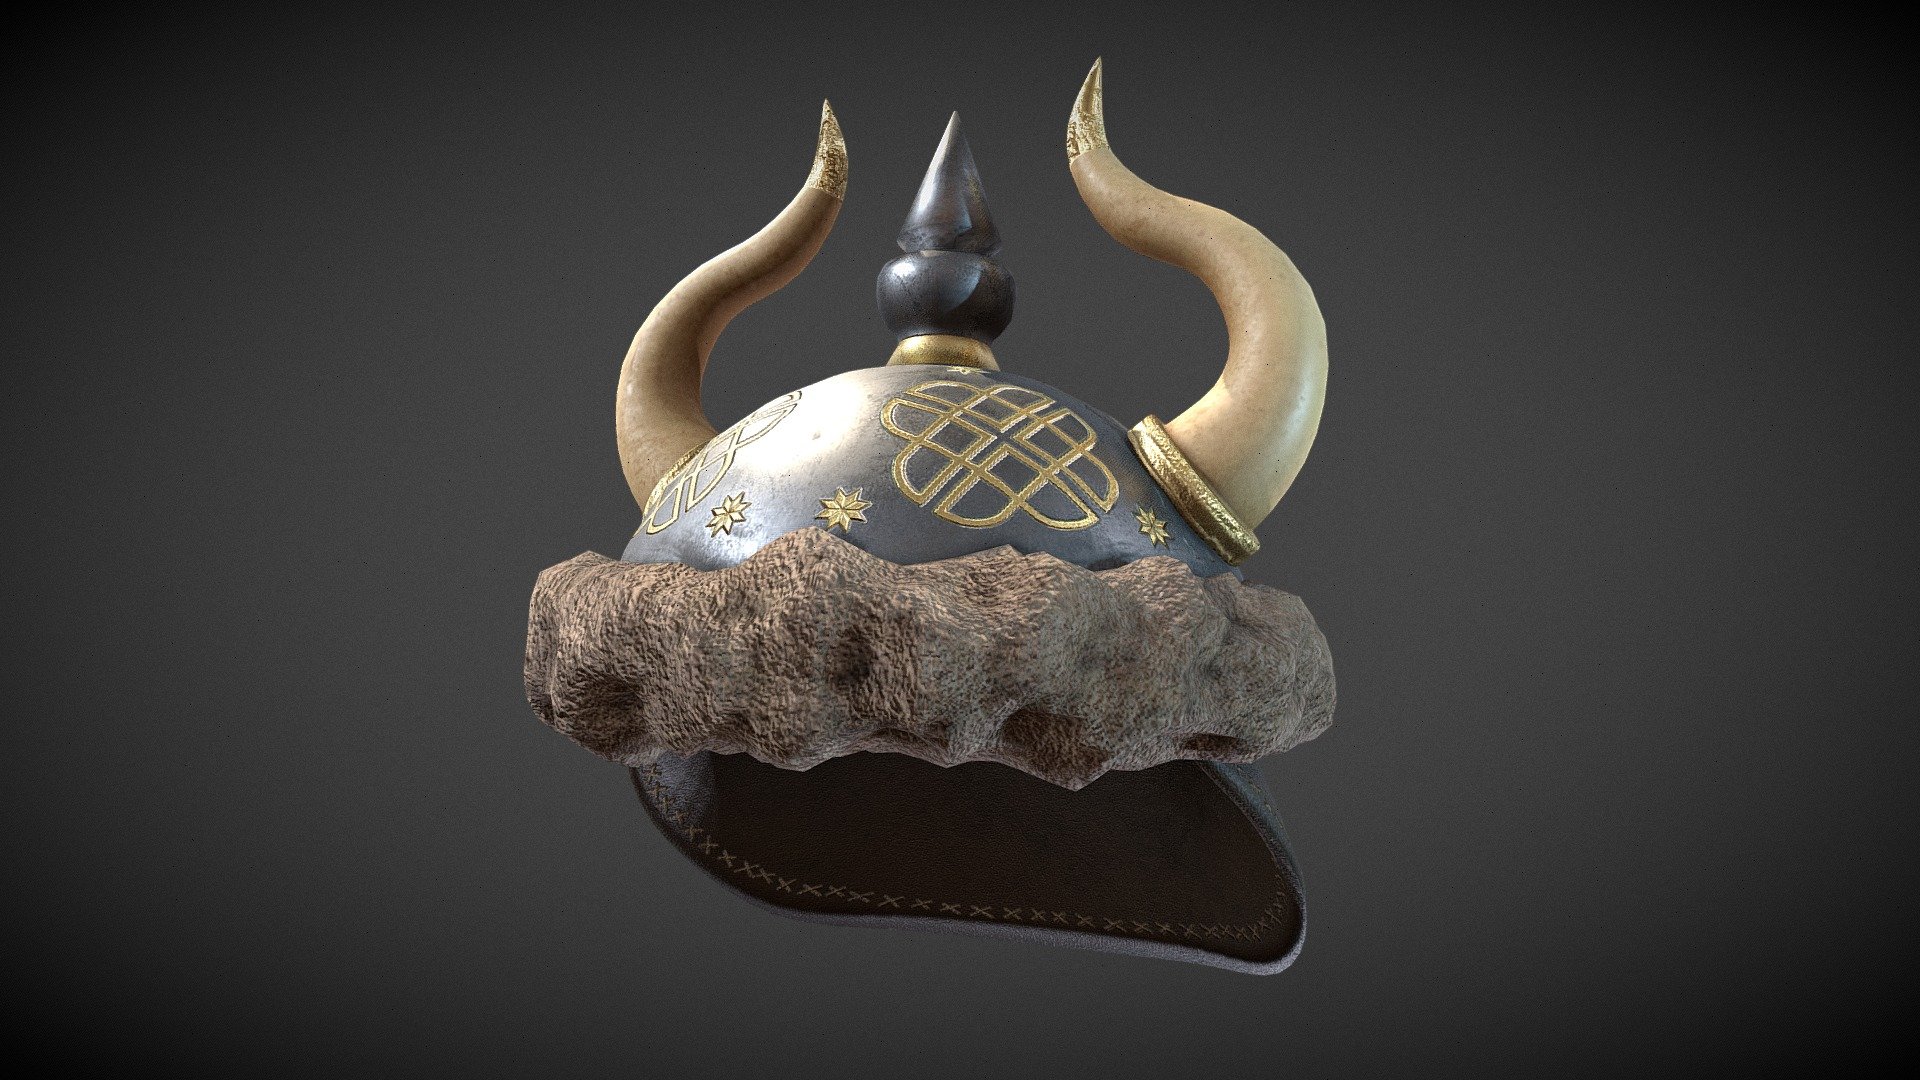 Barbarian Viking Horned Helmet inspired from Conan the Barbarian - Armor Model/Texture work by Outworld Studios

Must give credit to Outworld Studios if using this asset

Show support by joining my discord: https://discord.gg/EgWSkp8Cxn

Portoflio: https://www.artstation.com/outworldstudios - Barbarian Viking Horned Helmet - Buy Royalty Free 3D model by Outworld Studios (@outworldstudios) 3d model